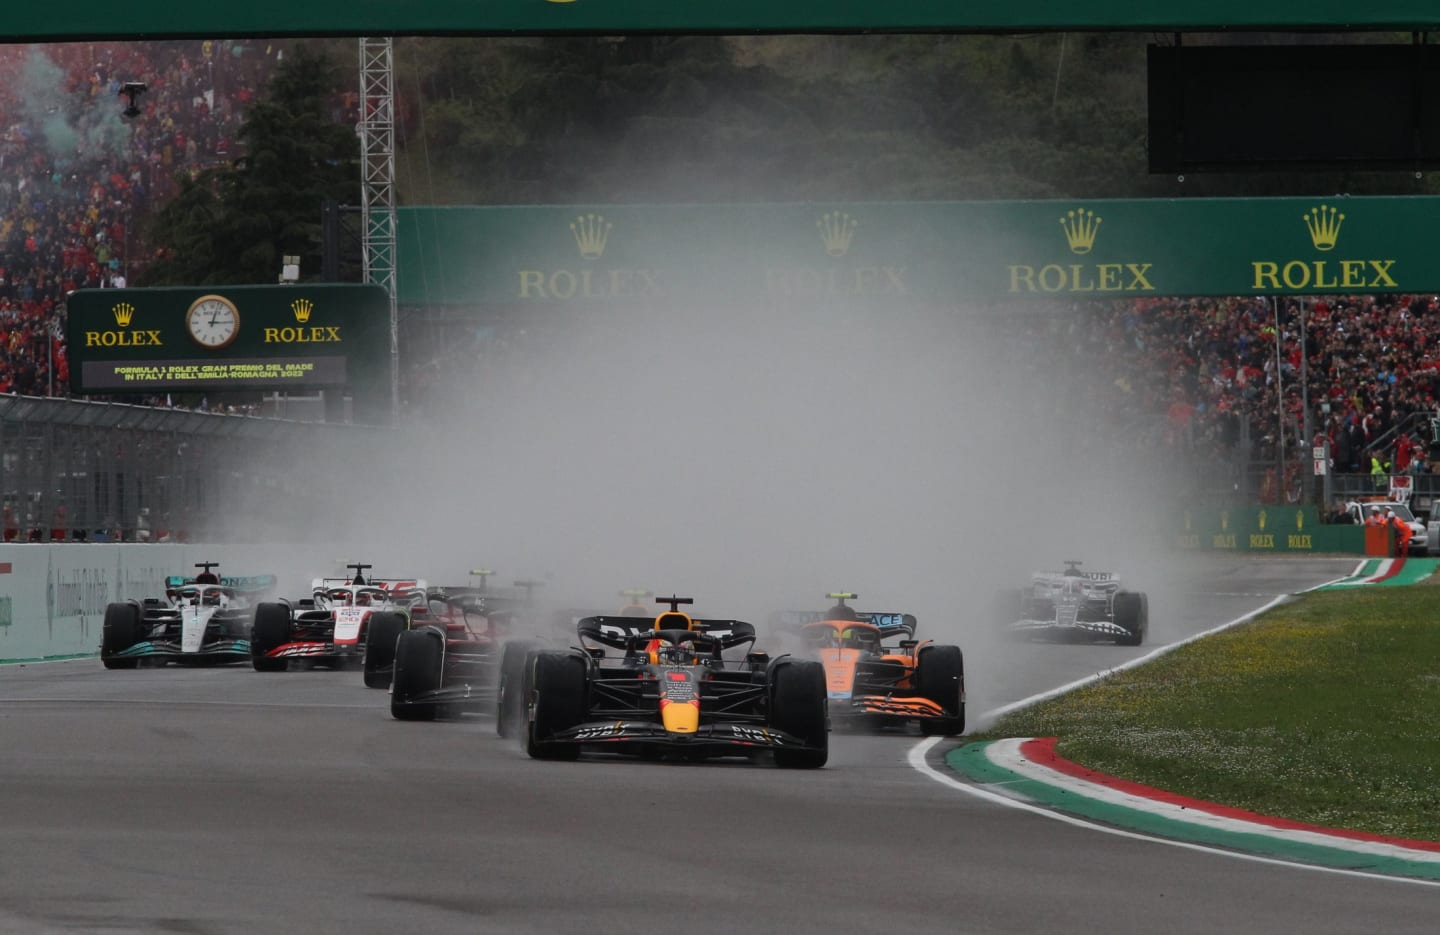 IMOLA, ITALY - APRIL 24: Start of the Grand Prix in the wet, in the lead is Max Verstappen (NDL)